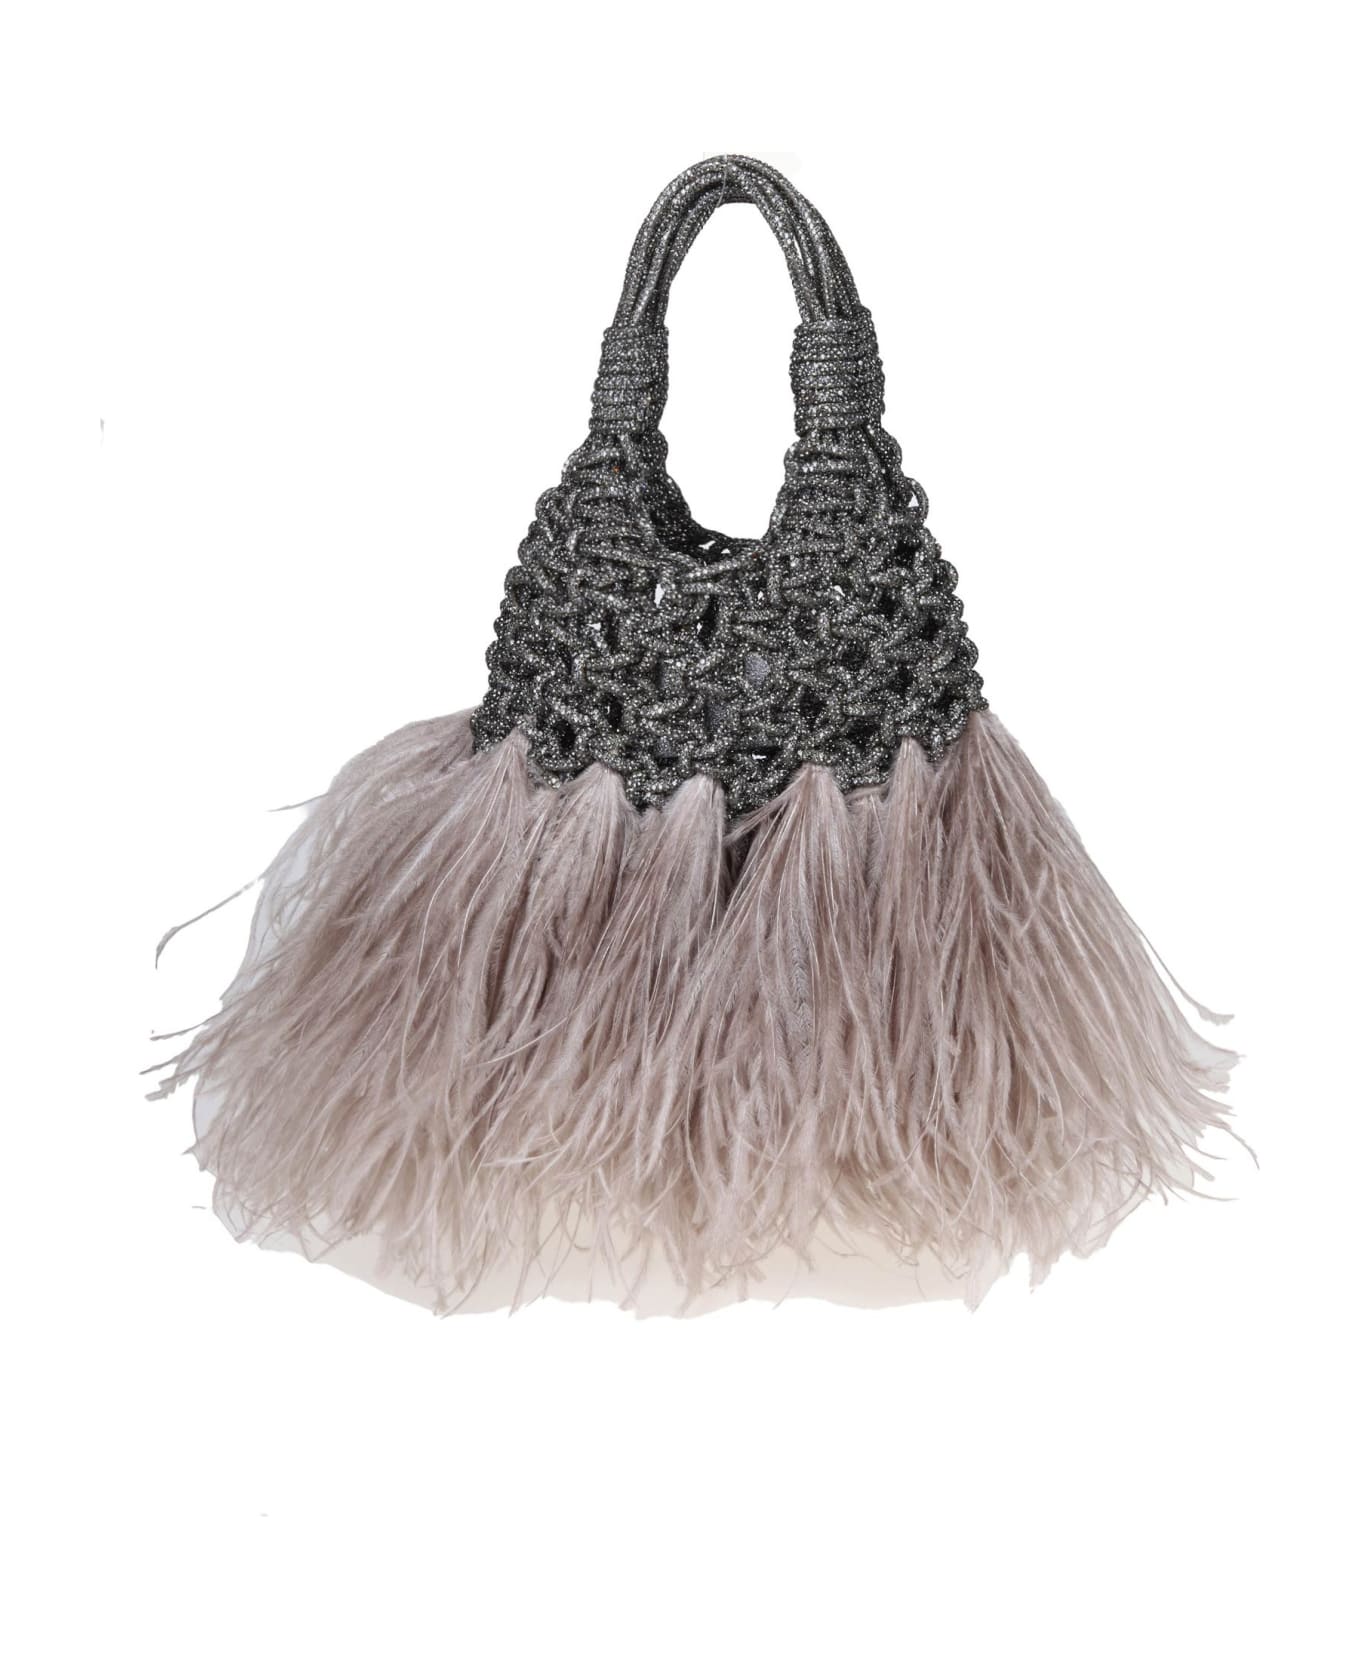 Hibourama Jewel Bag Woven With Ostrich Feathers - Black